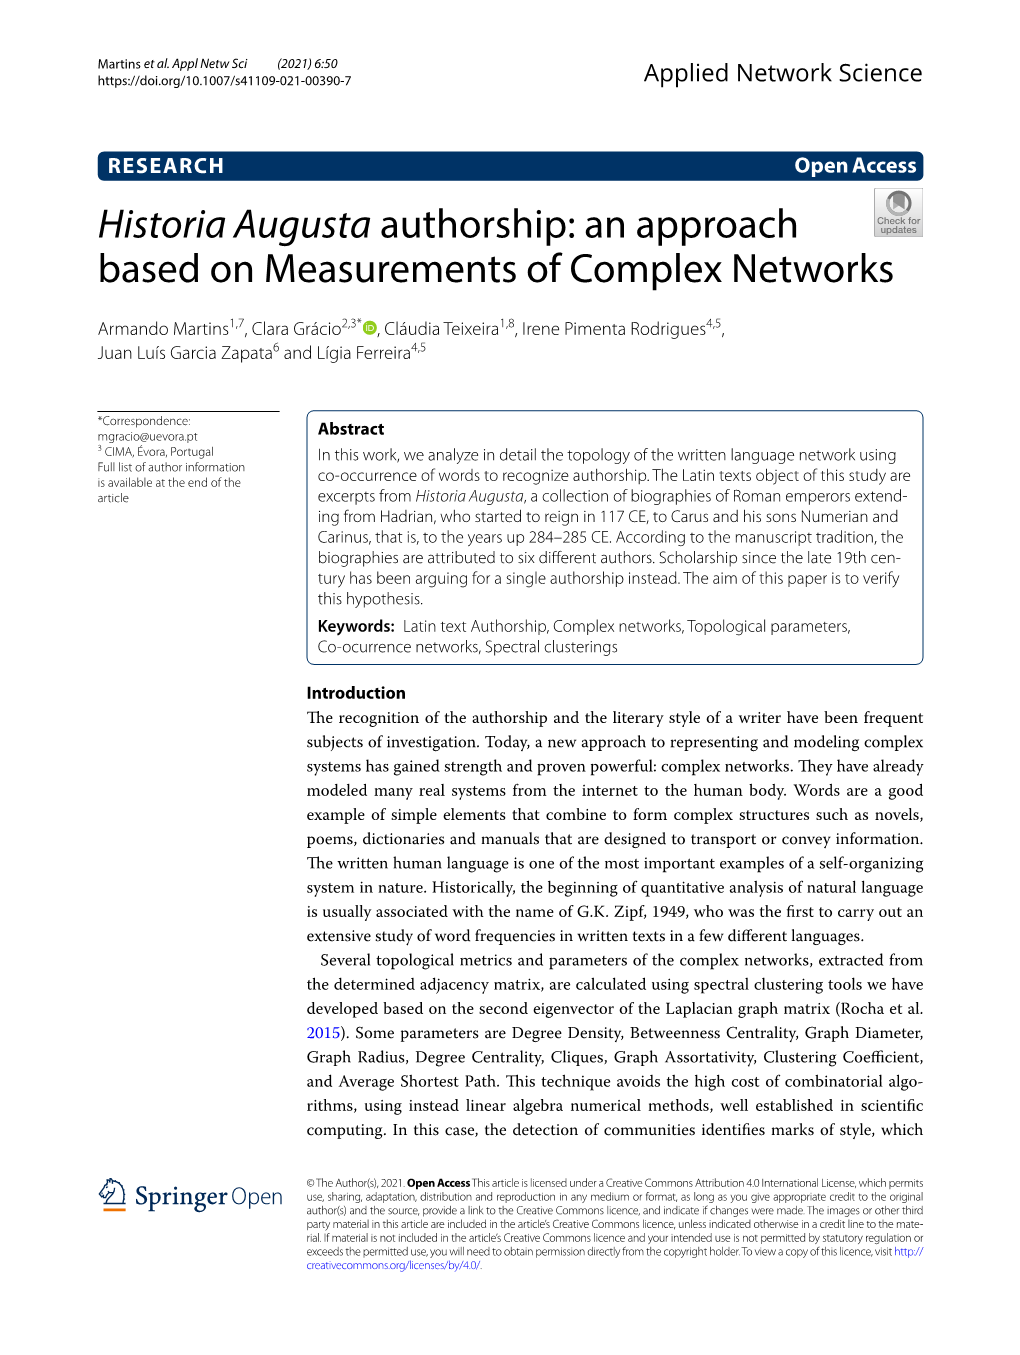 Historia Augusta Authorship: an Approach Based on Measurements of Complex Networks